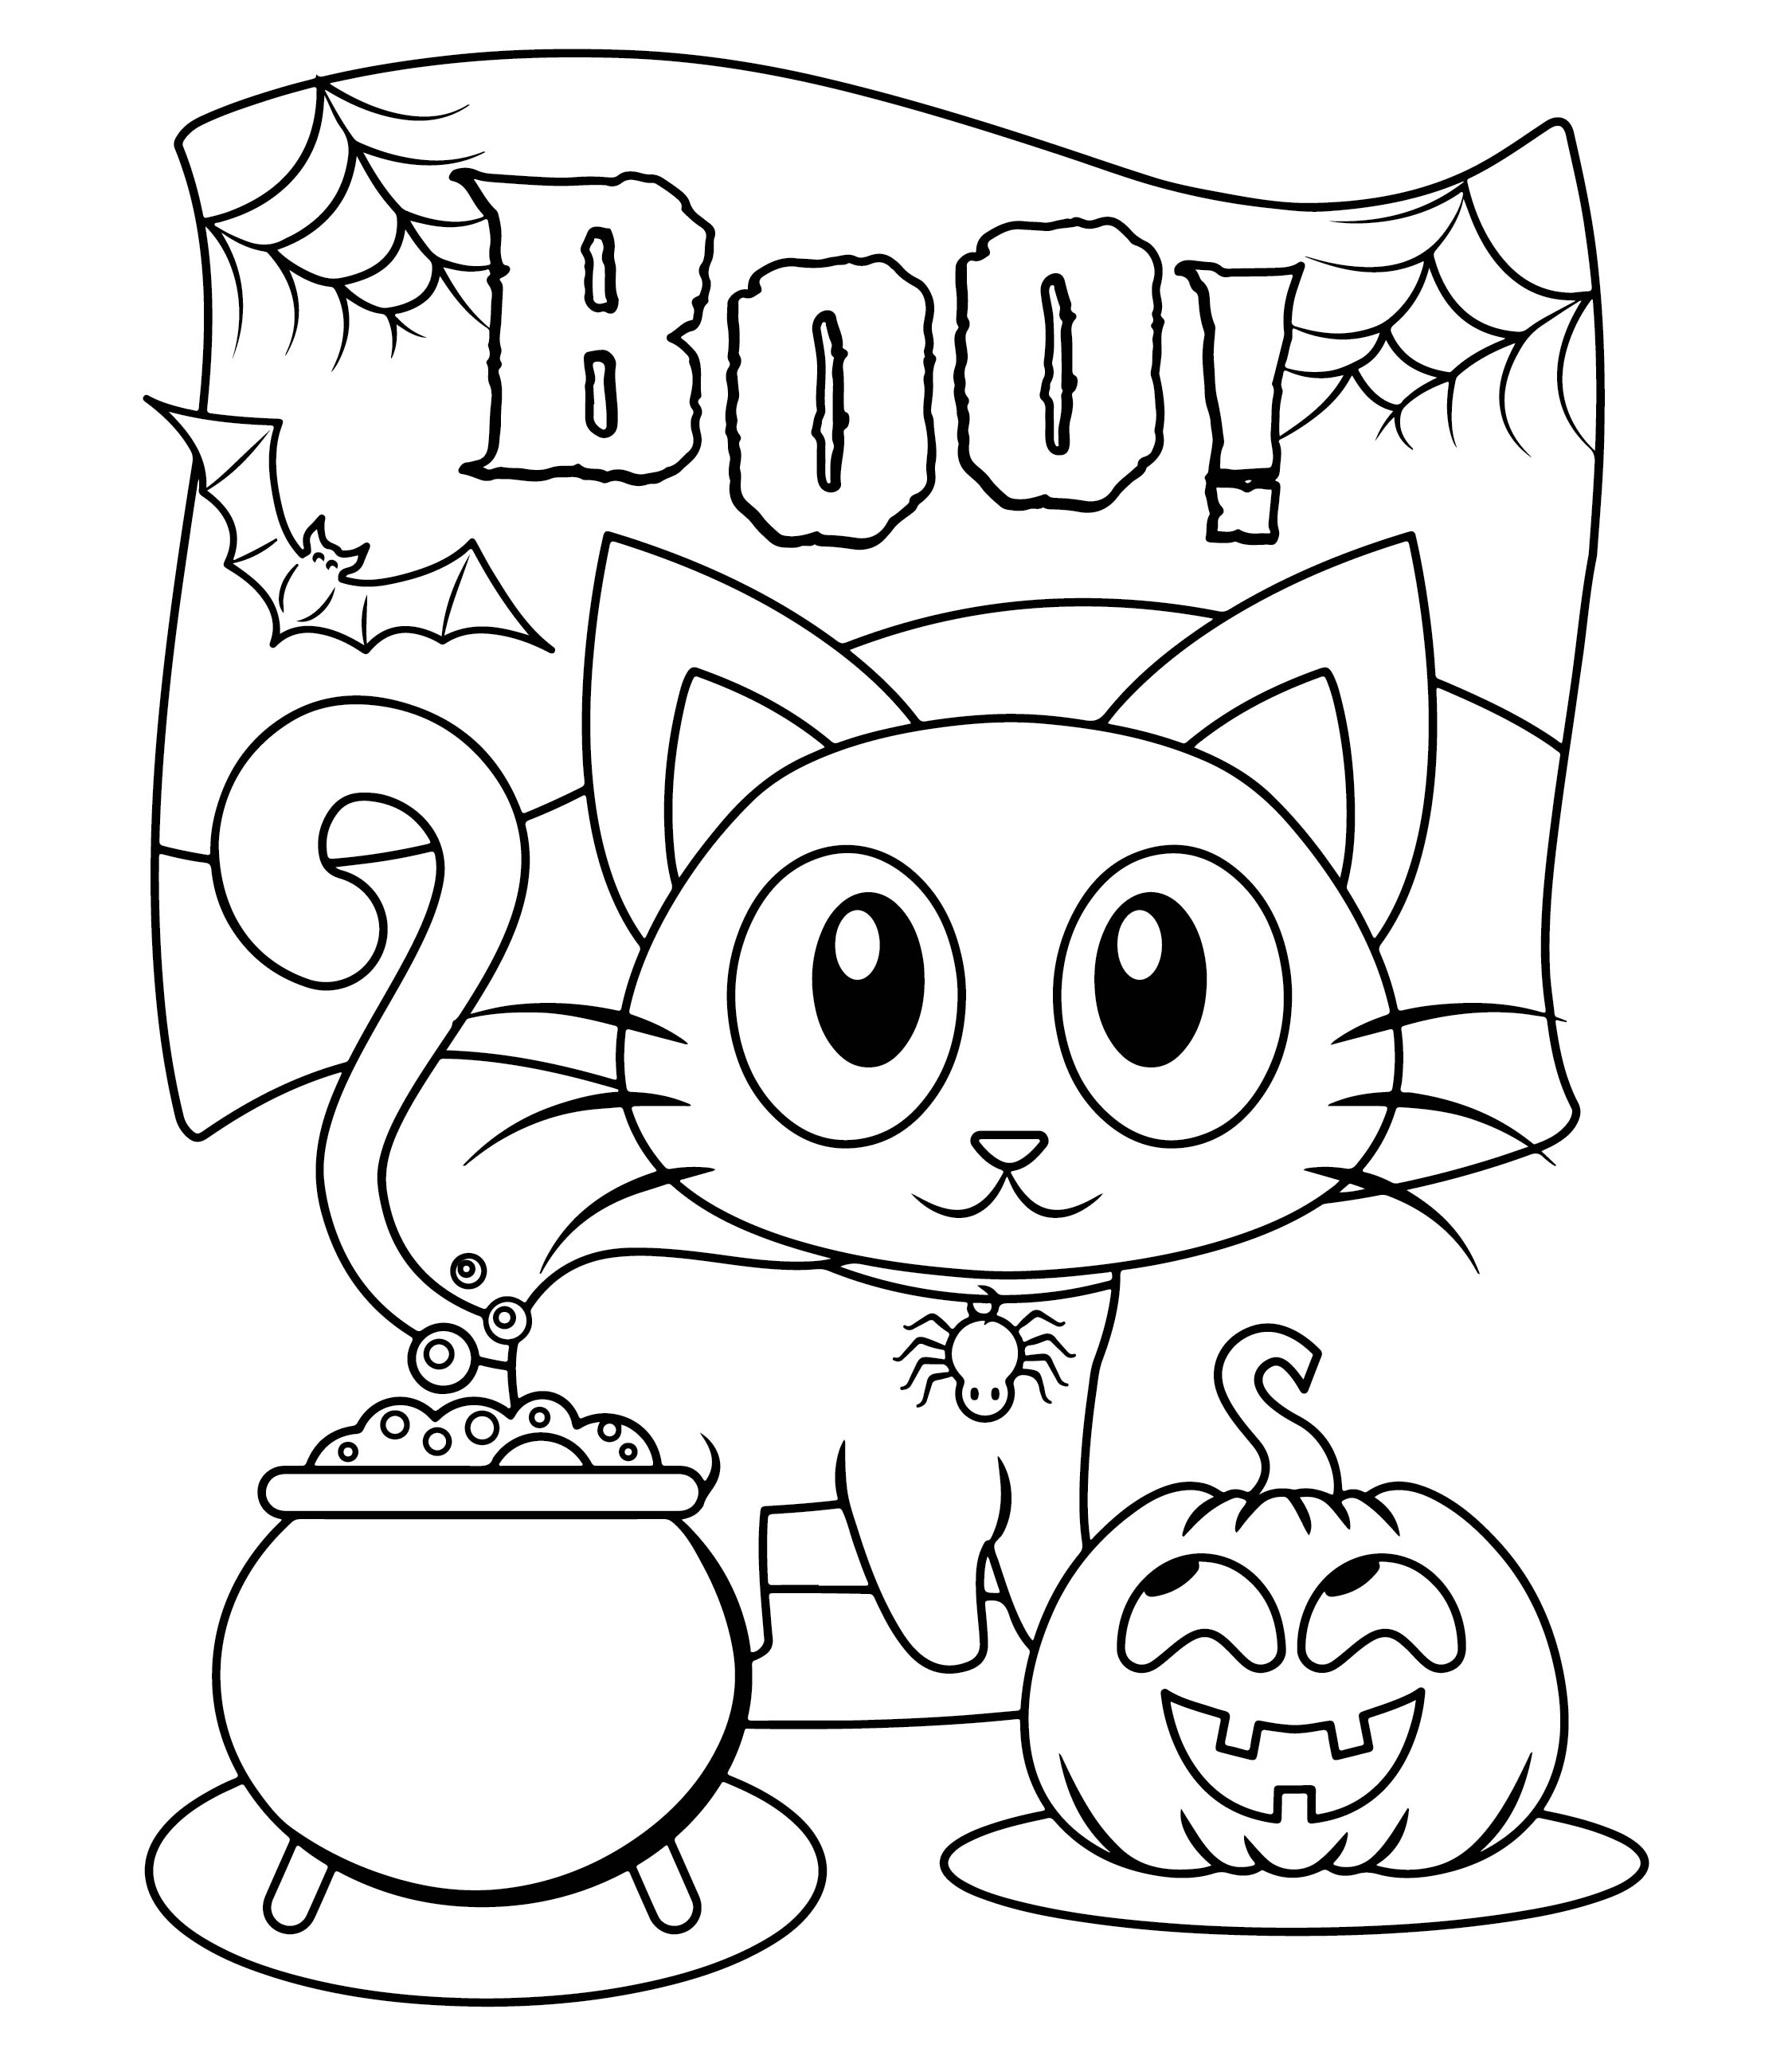 Free Printable Halloween Coloring Pages For Kindergarten Printable Templates